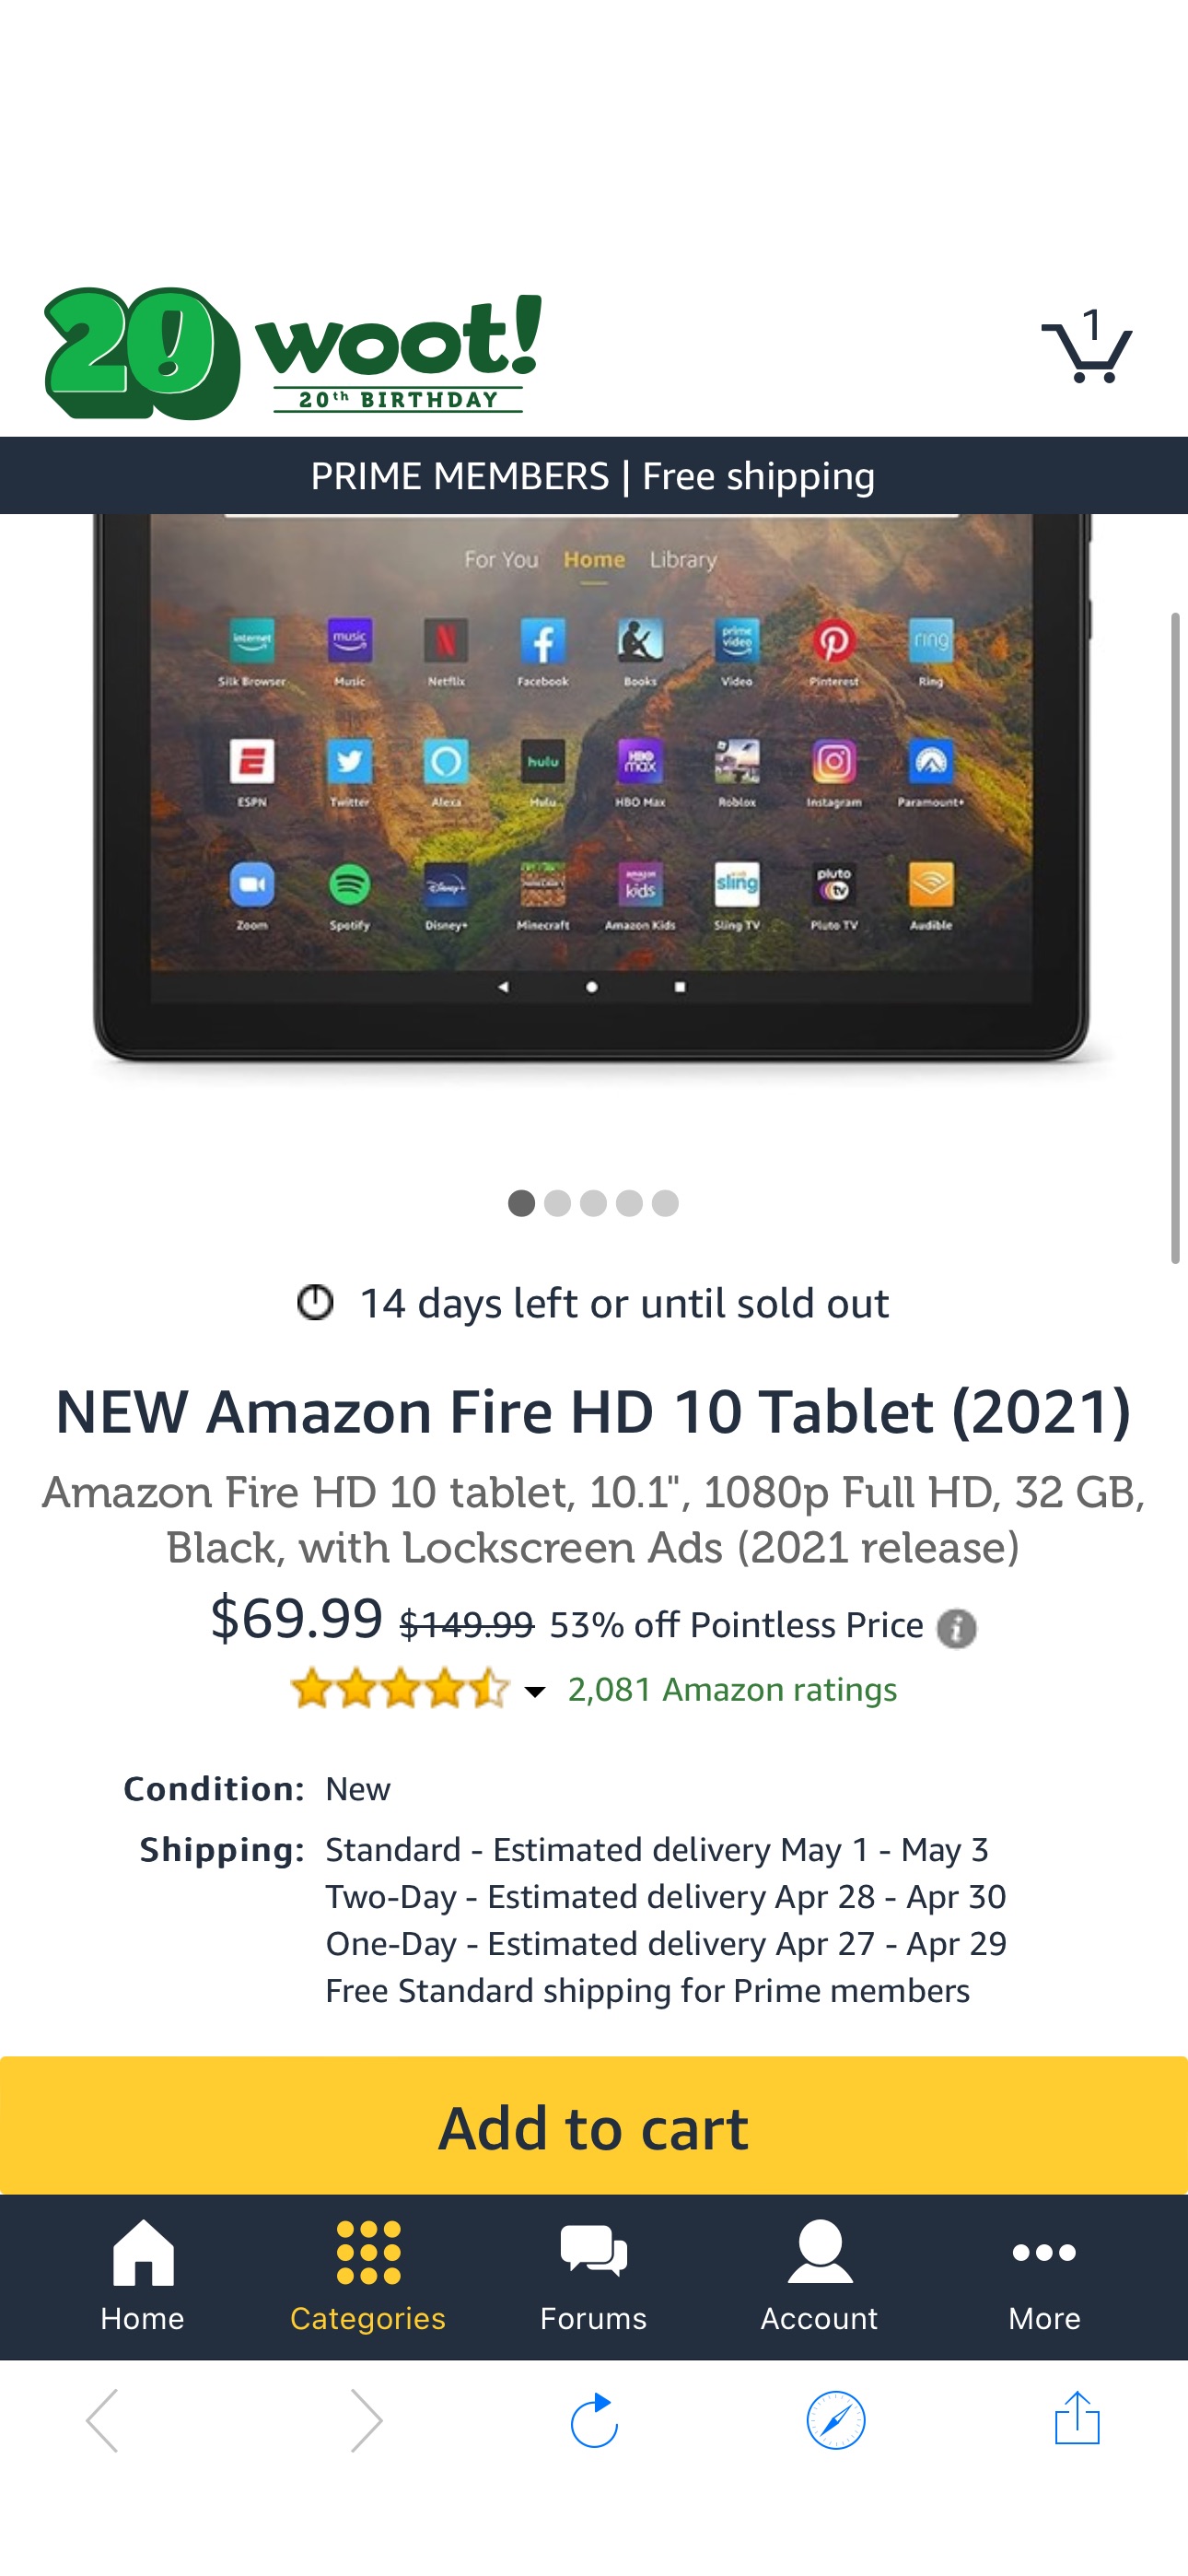 NEW Amazon Fire HD 10 Tablet (2021)